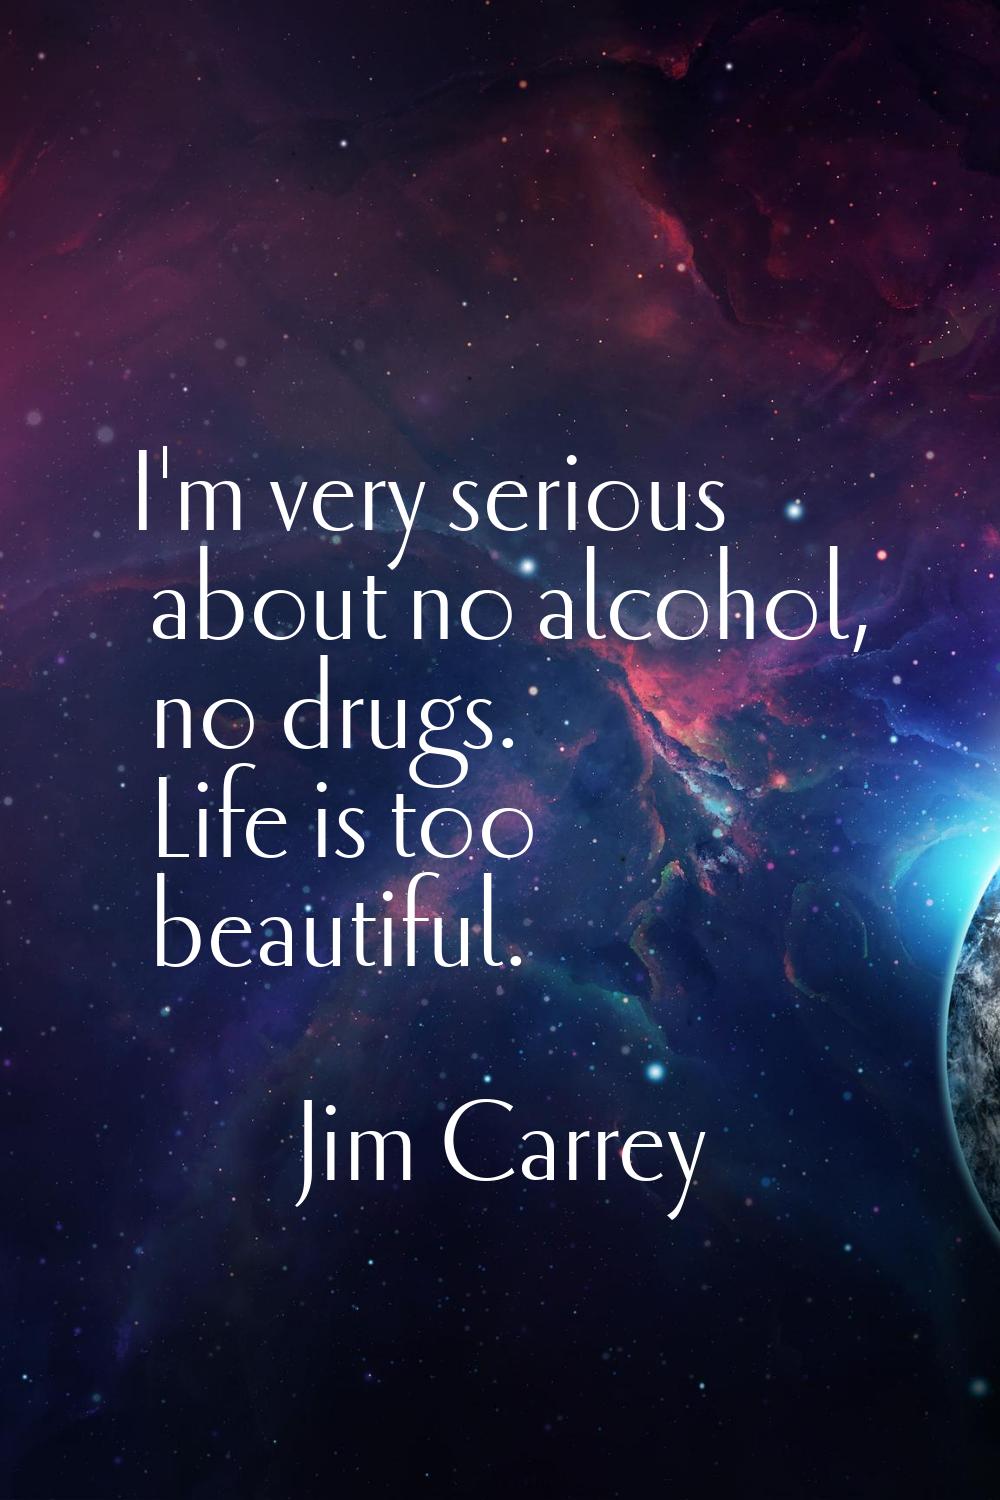 I'm very serious about no alcohol, no drugs. Life is too beautiful.